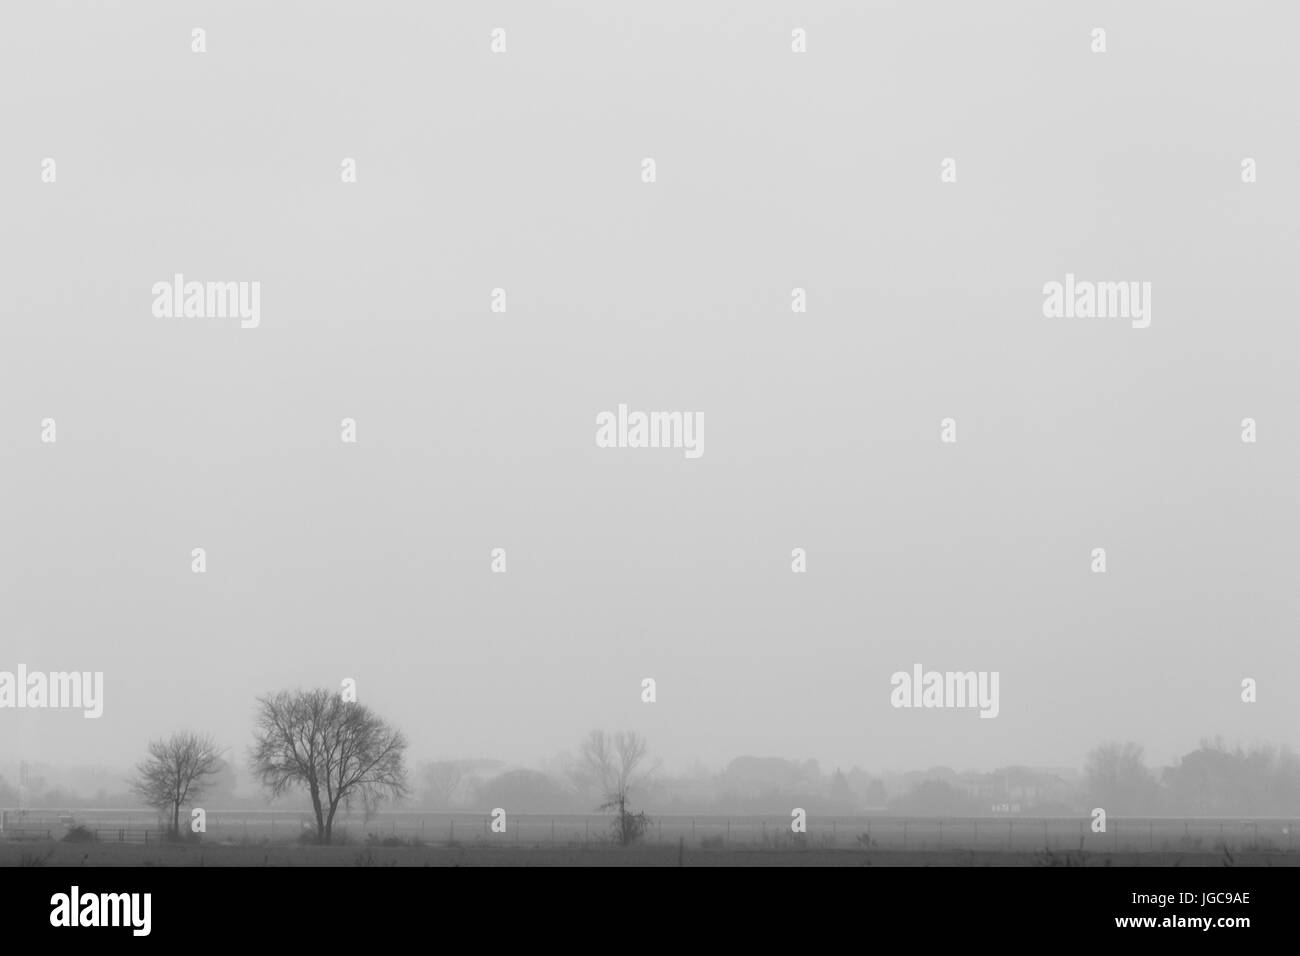 A minimalist view of some distant trees in the fog Stock Photo